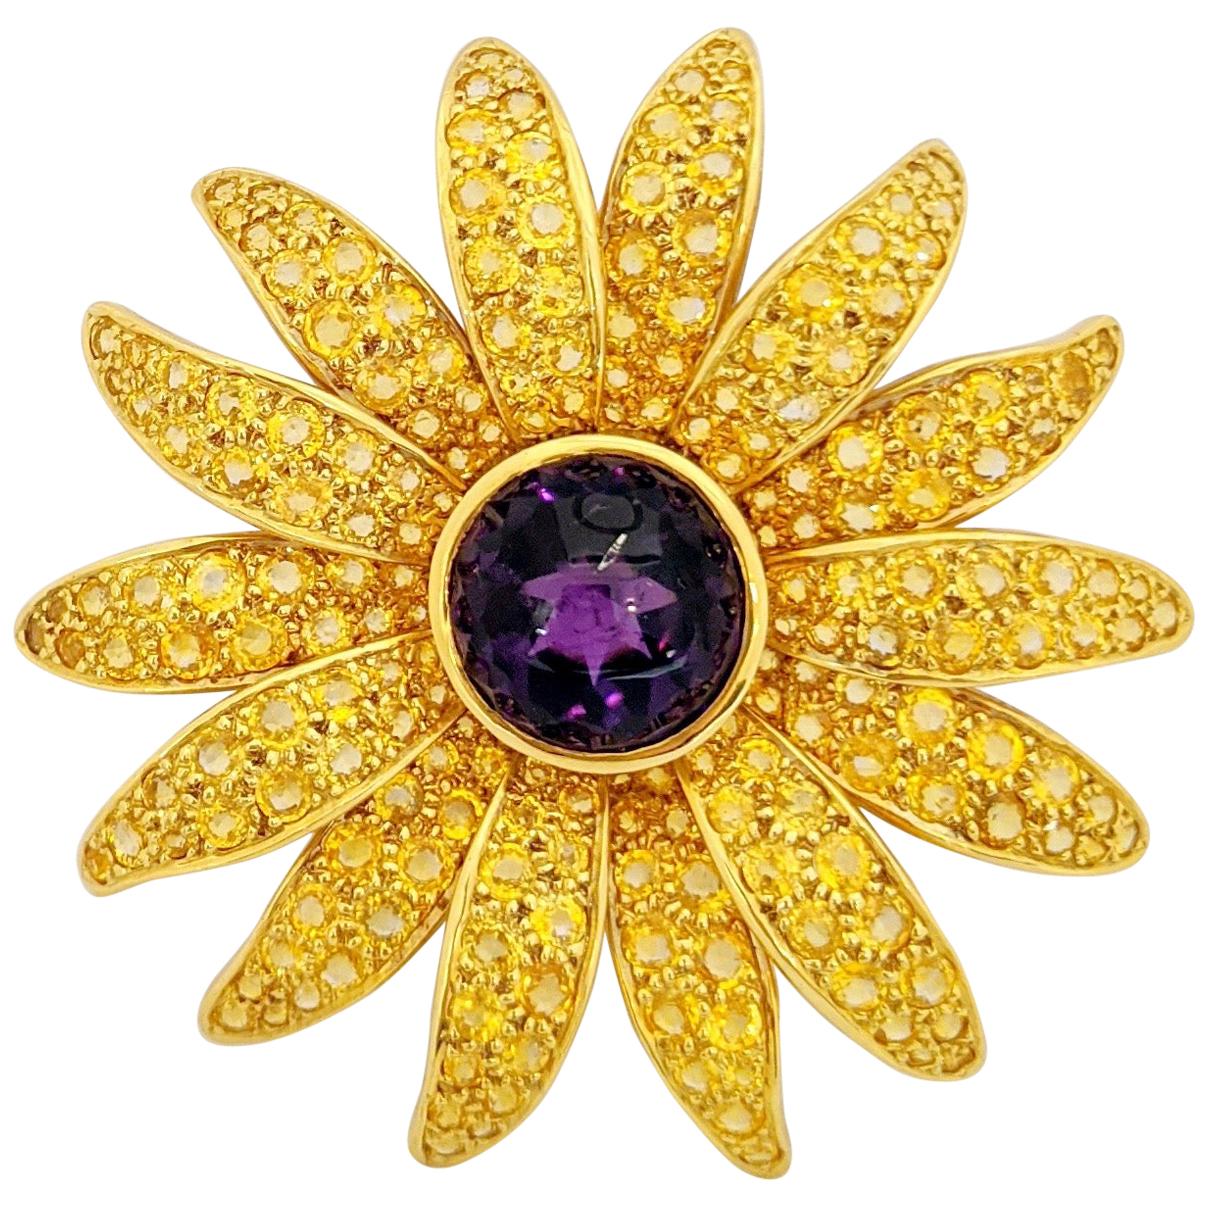 18kt Gold Sunflower Brooch, 20.24ct Yellow Sapphires and 15.58 Carat Amethyst